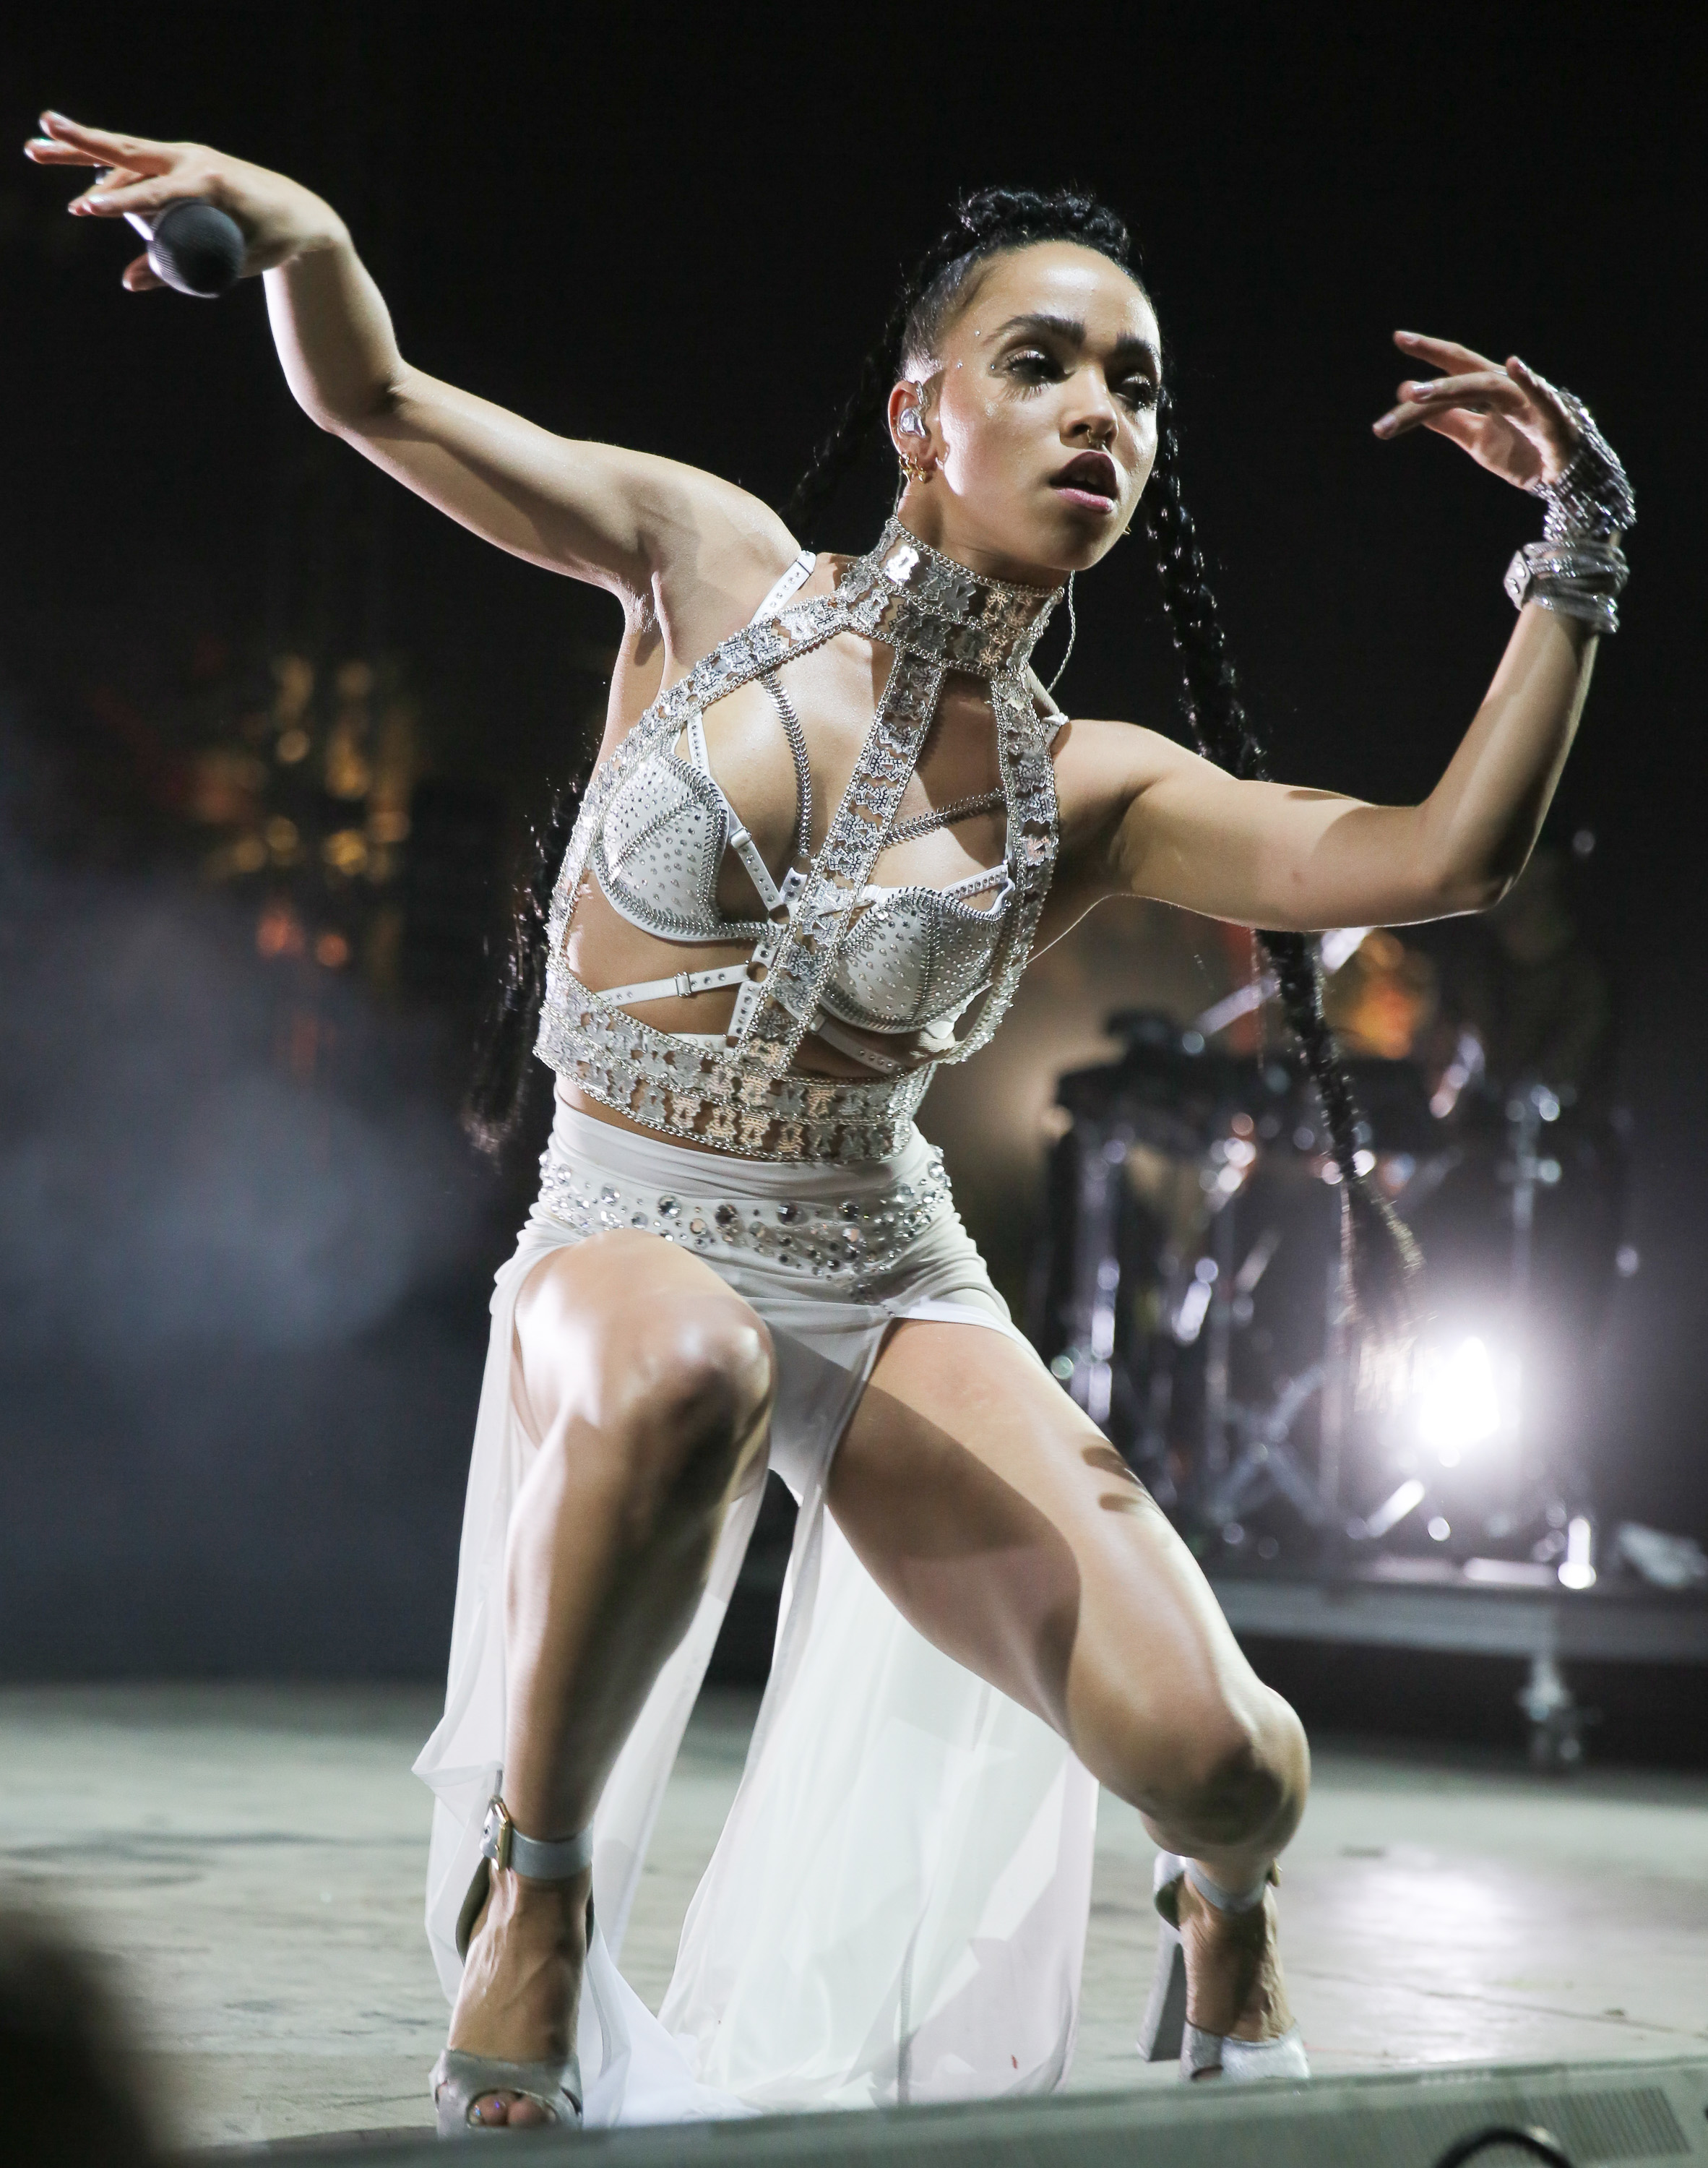 fka twigs dancing on stage at coachella in a creepyeha crystal lingerie set